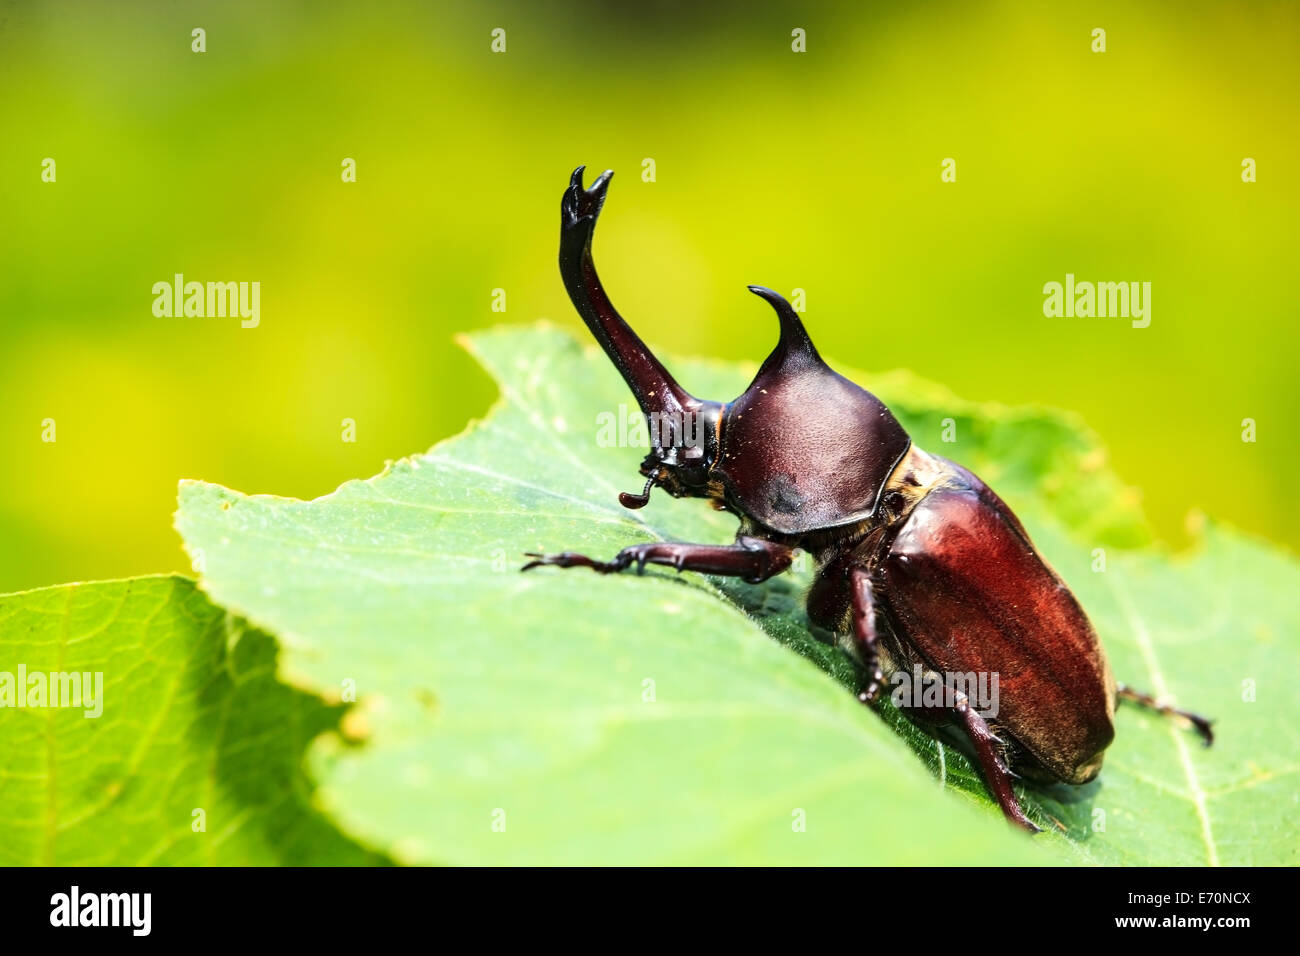 Rhinoceros beetle for adv or others purpose use Stock Photo